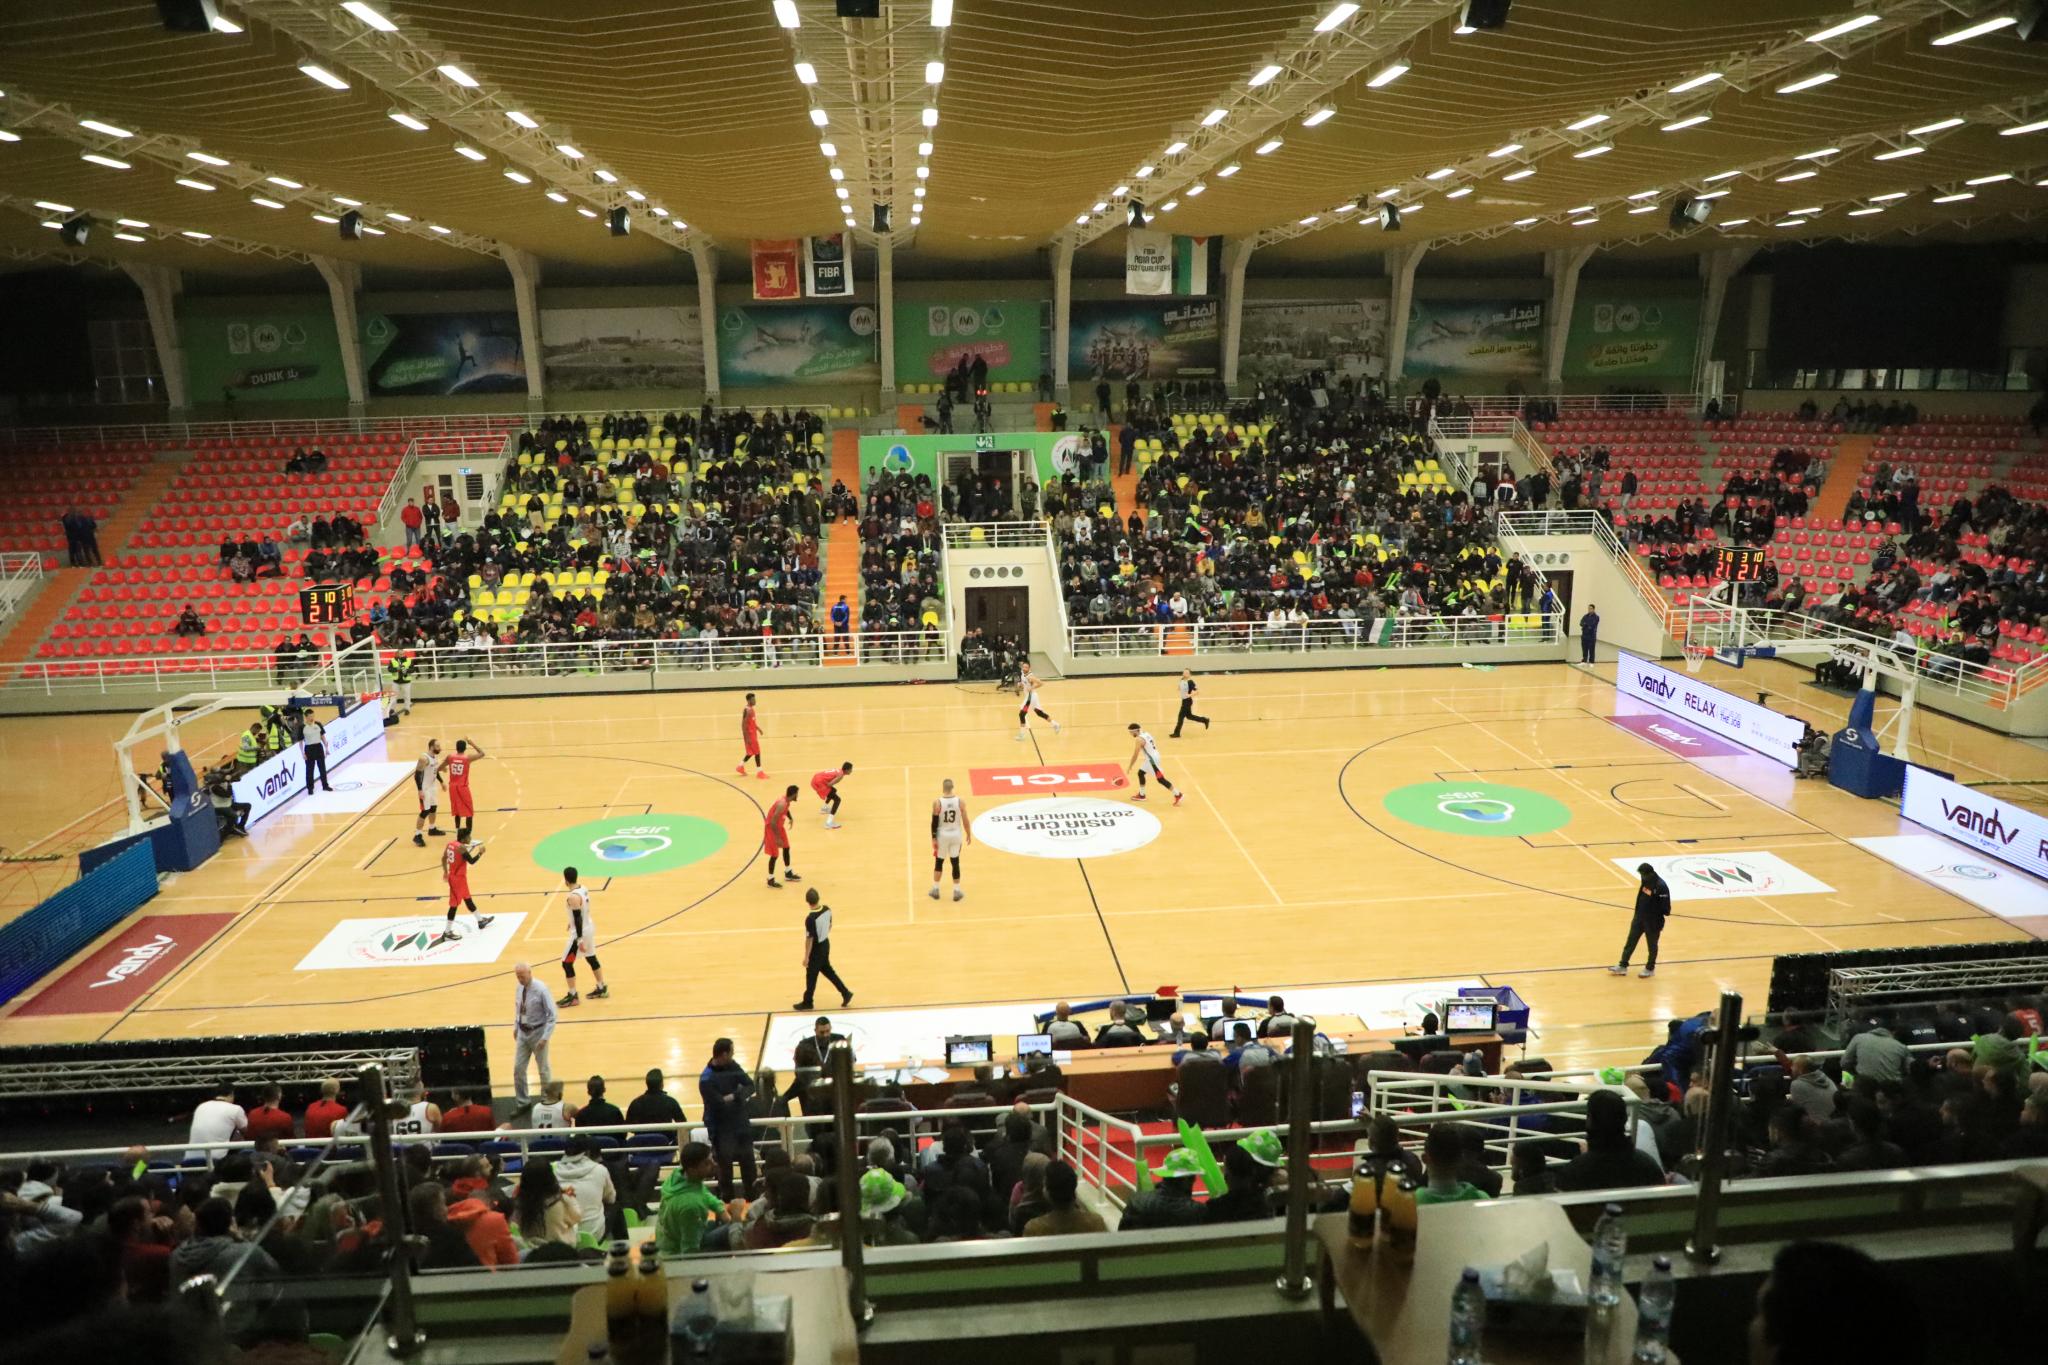 The Basketball game between the Palestinian team and Sri Lanka team in the Sport Hall